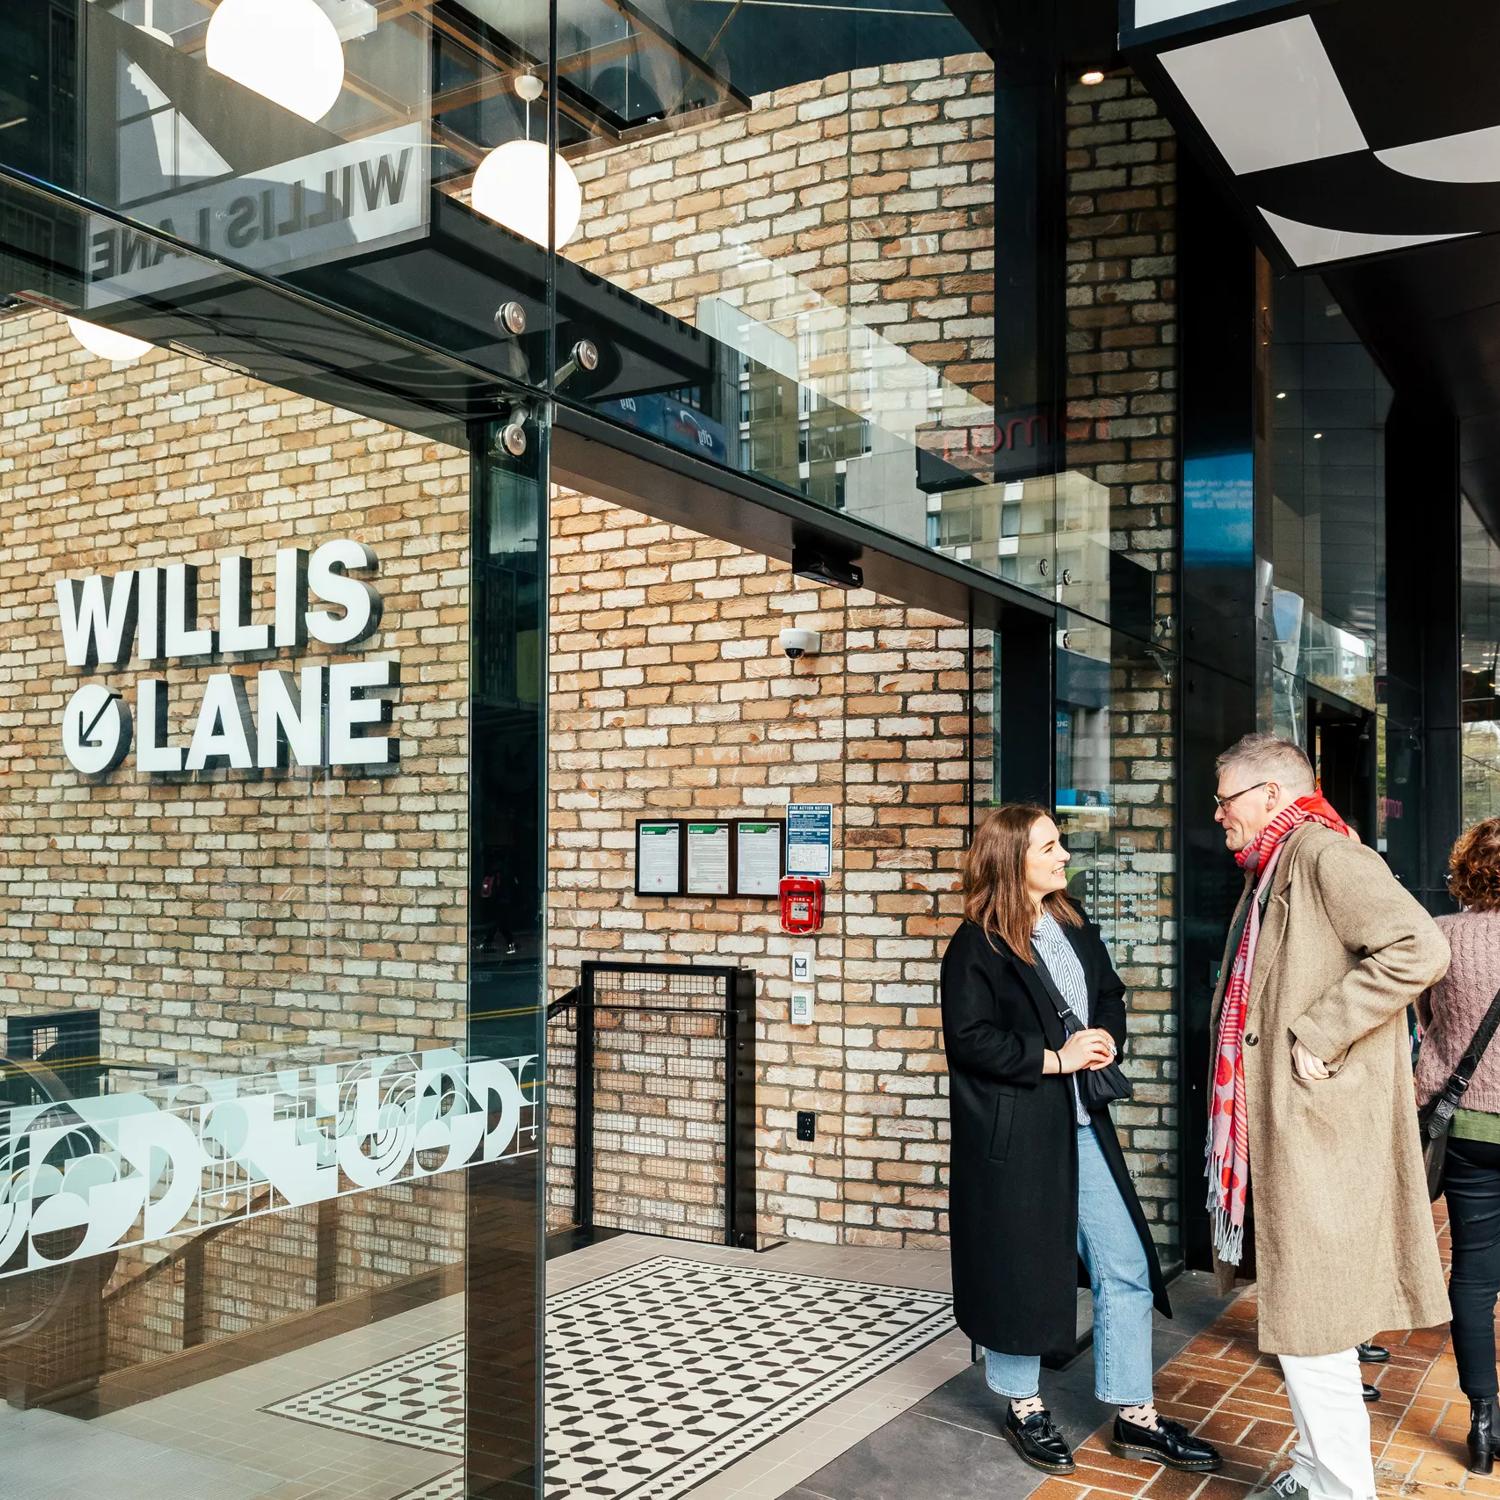 People walking by and standing outside the entry to Willis Lane, with its large glass window, sliding door, brick wall, and sign leading down to Willis Lane.